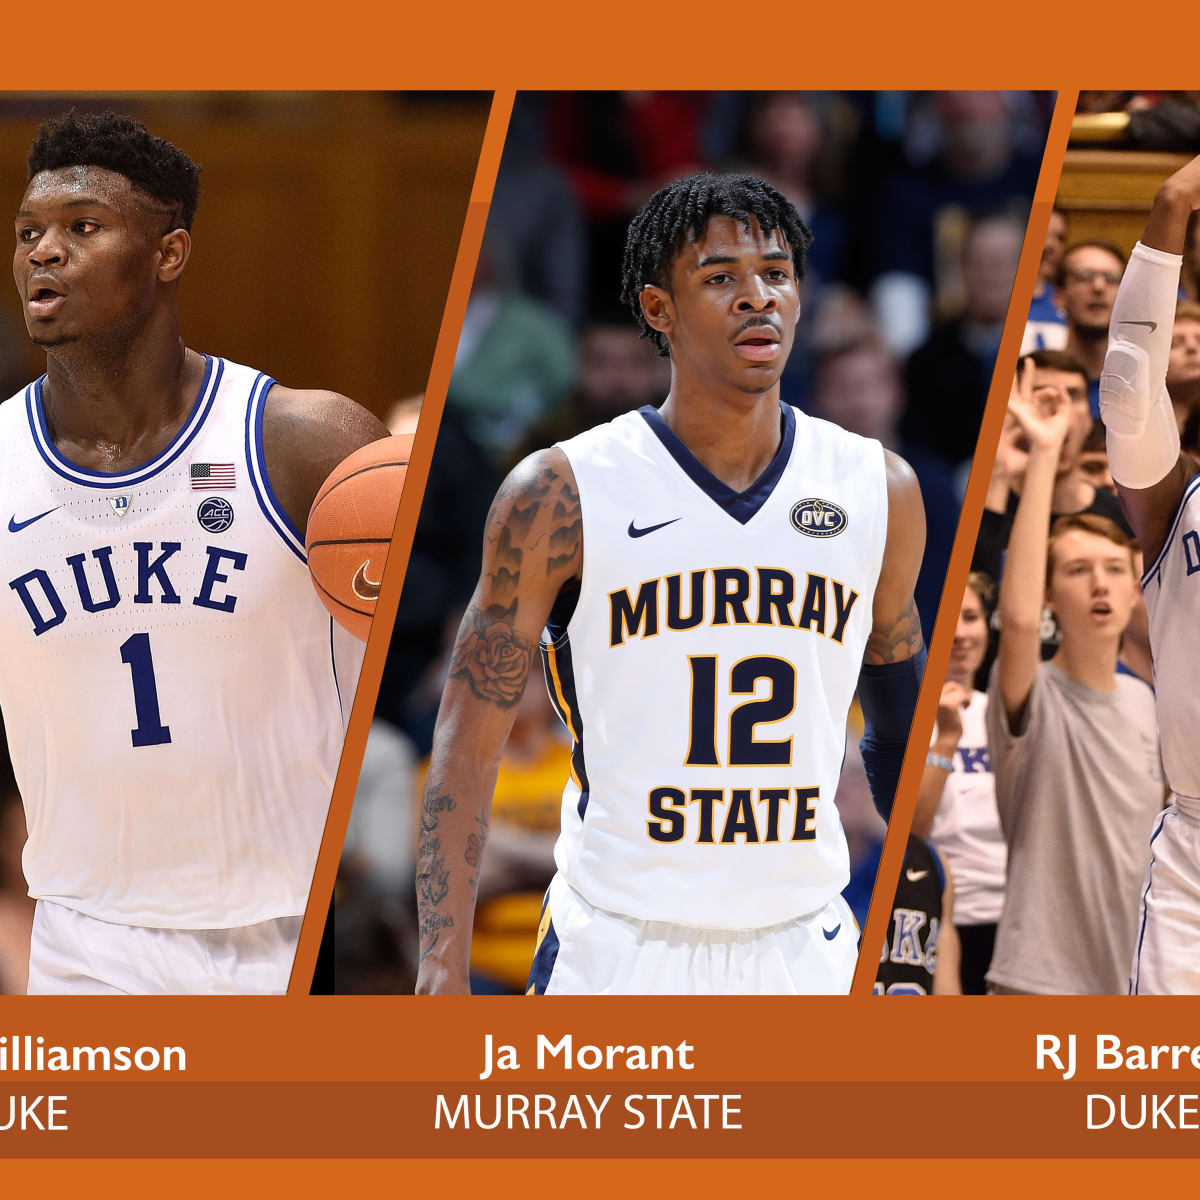 Zion Williamson or Ja Morant? An NBA question of preference nobody